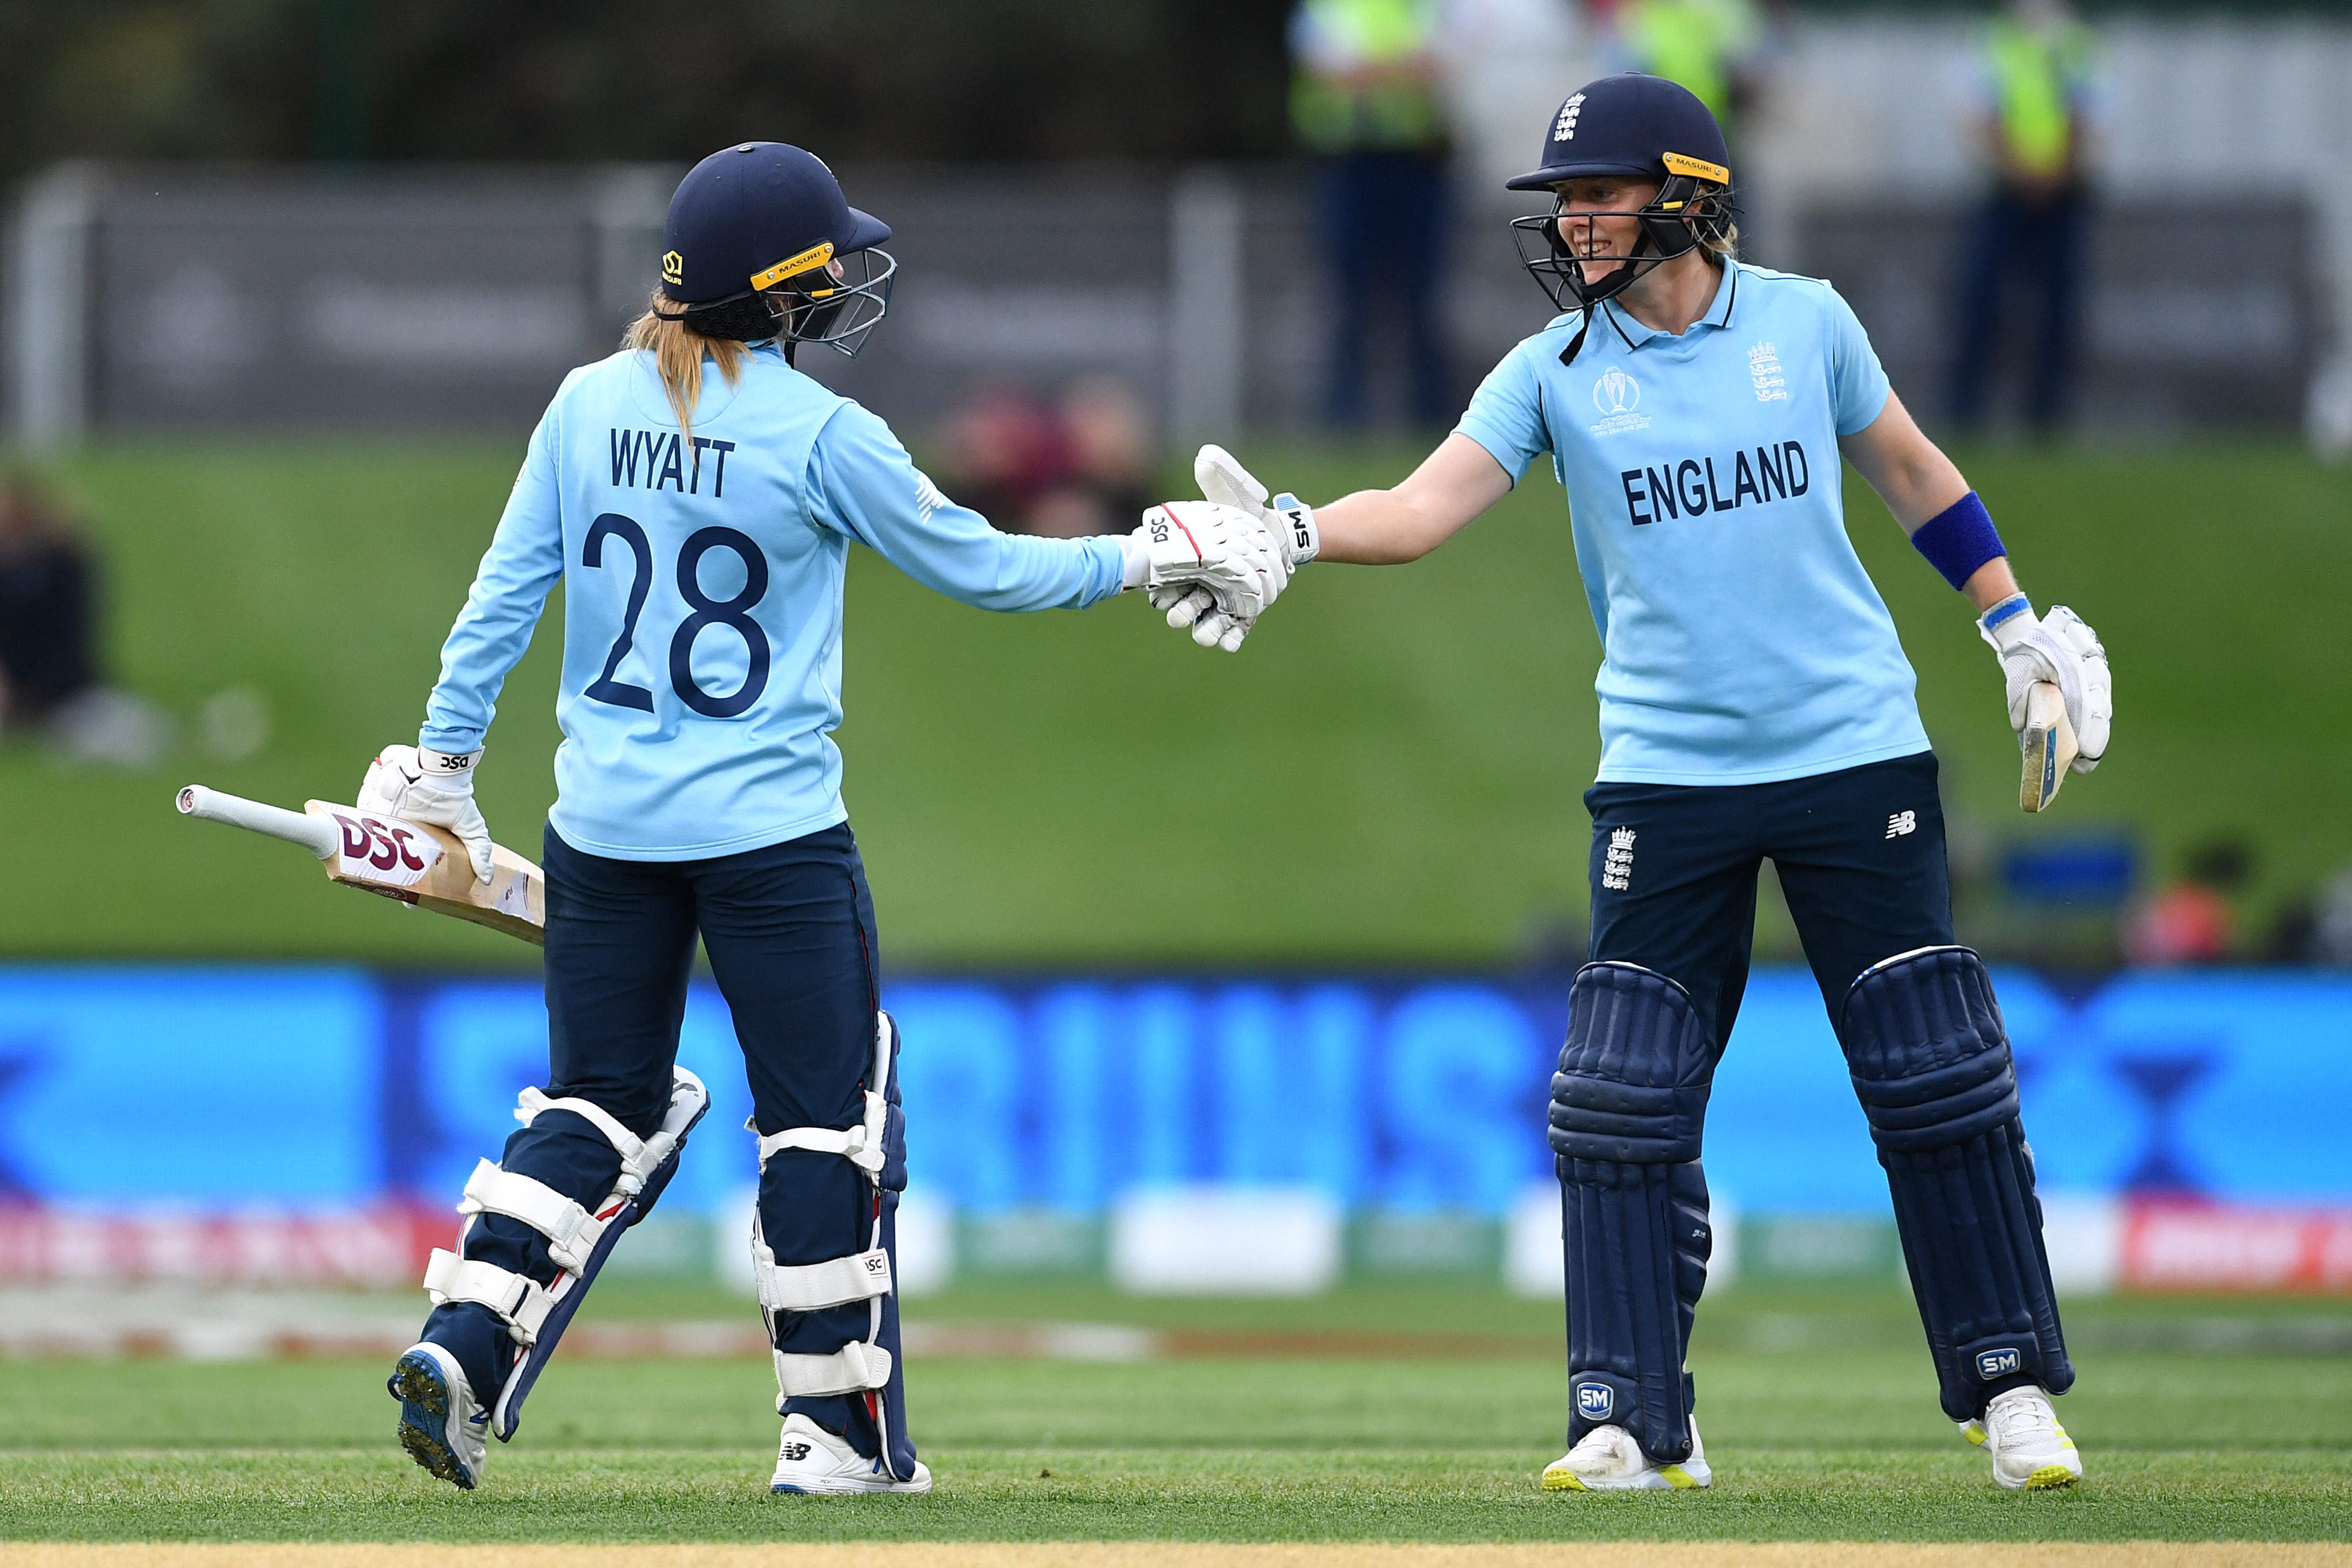 England's Danni Wyatt, left, is congratulated by team captain Heather Knight after scoring a half century